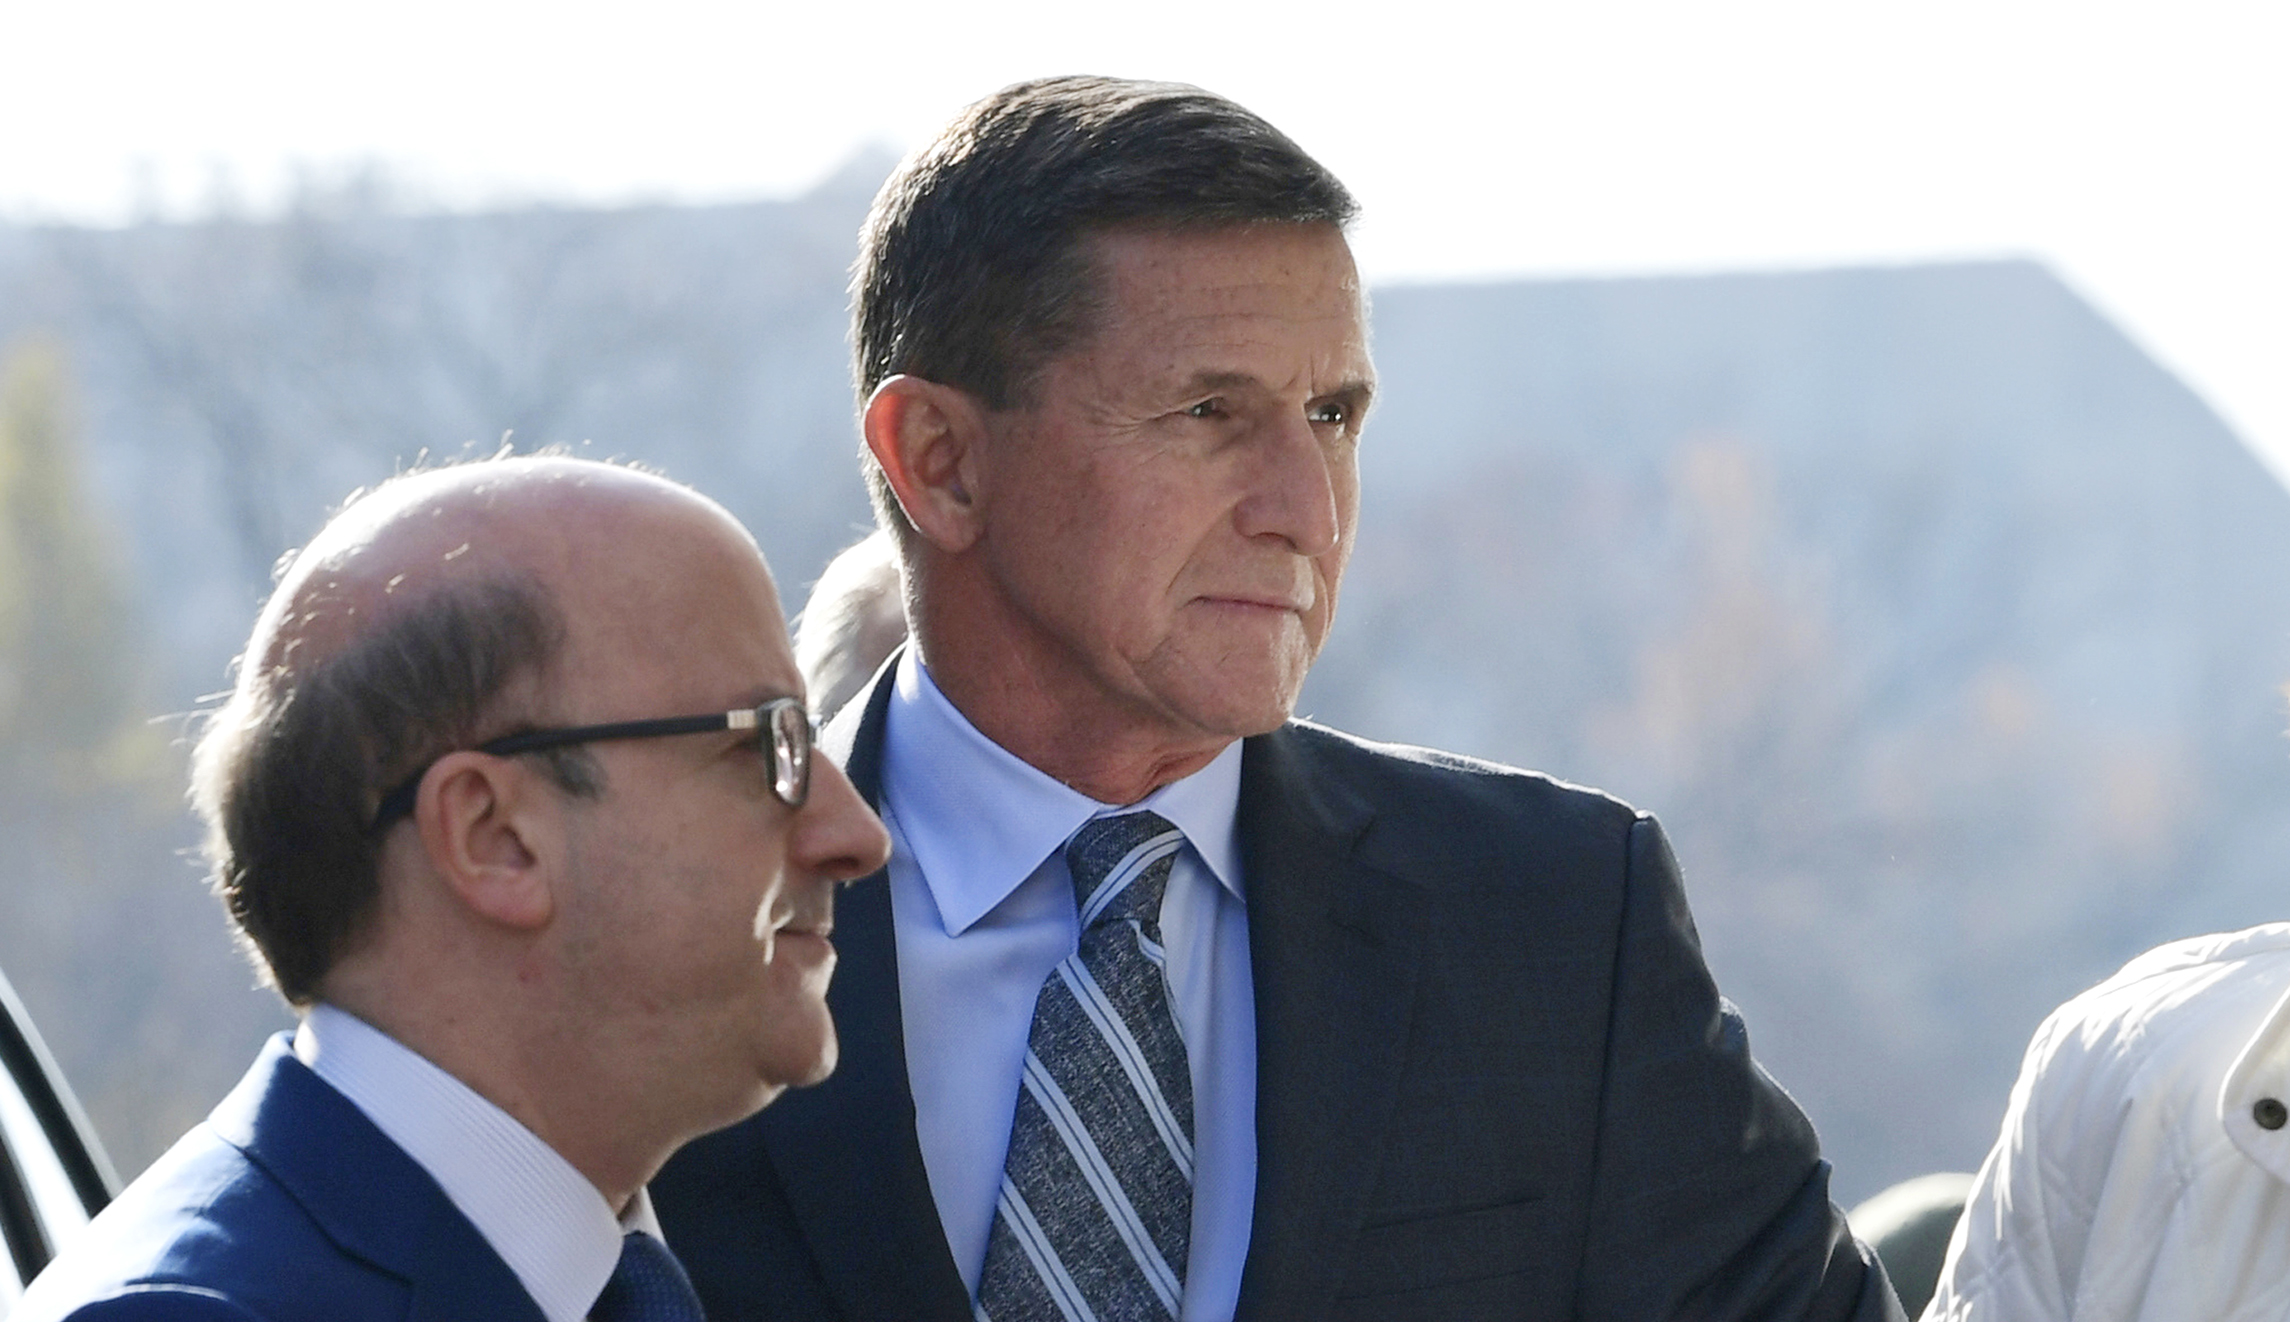 FBI faces questions about charge against Michael Flynn, given Clinton aides’ statements on server